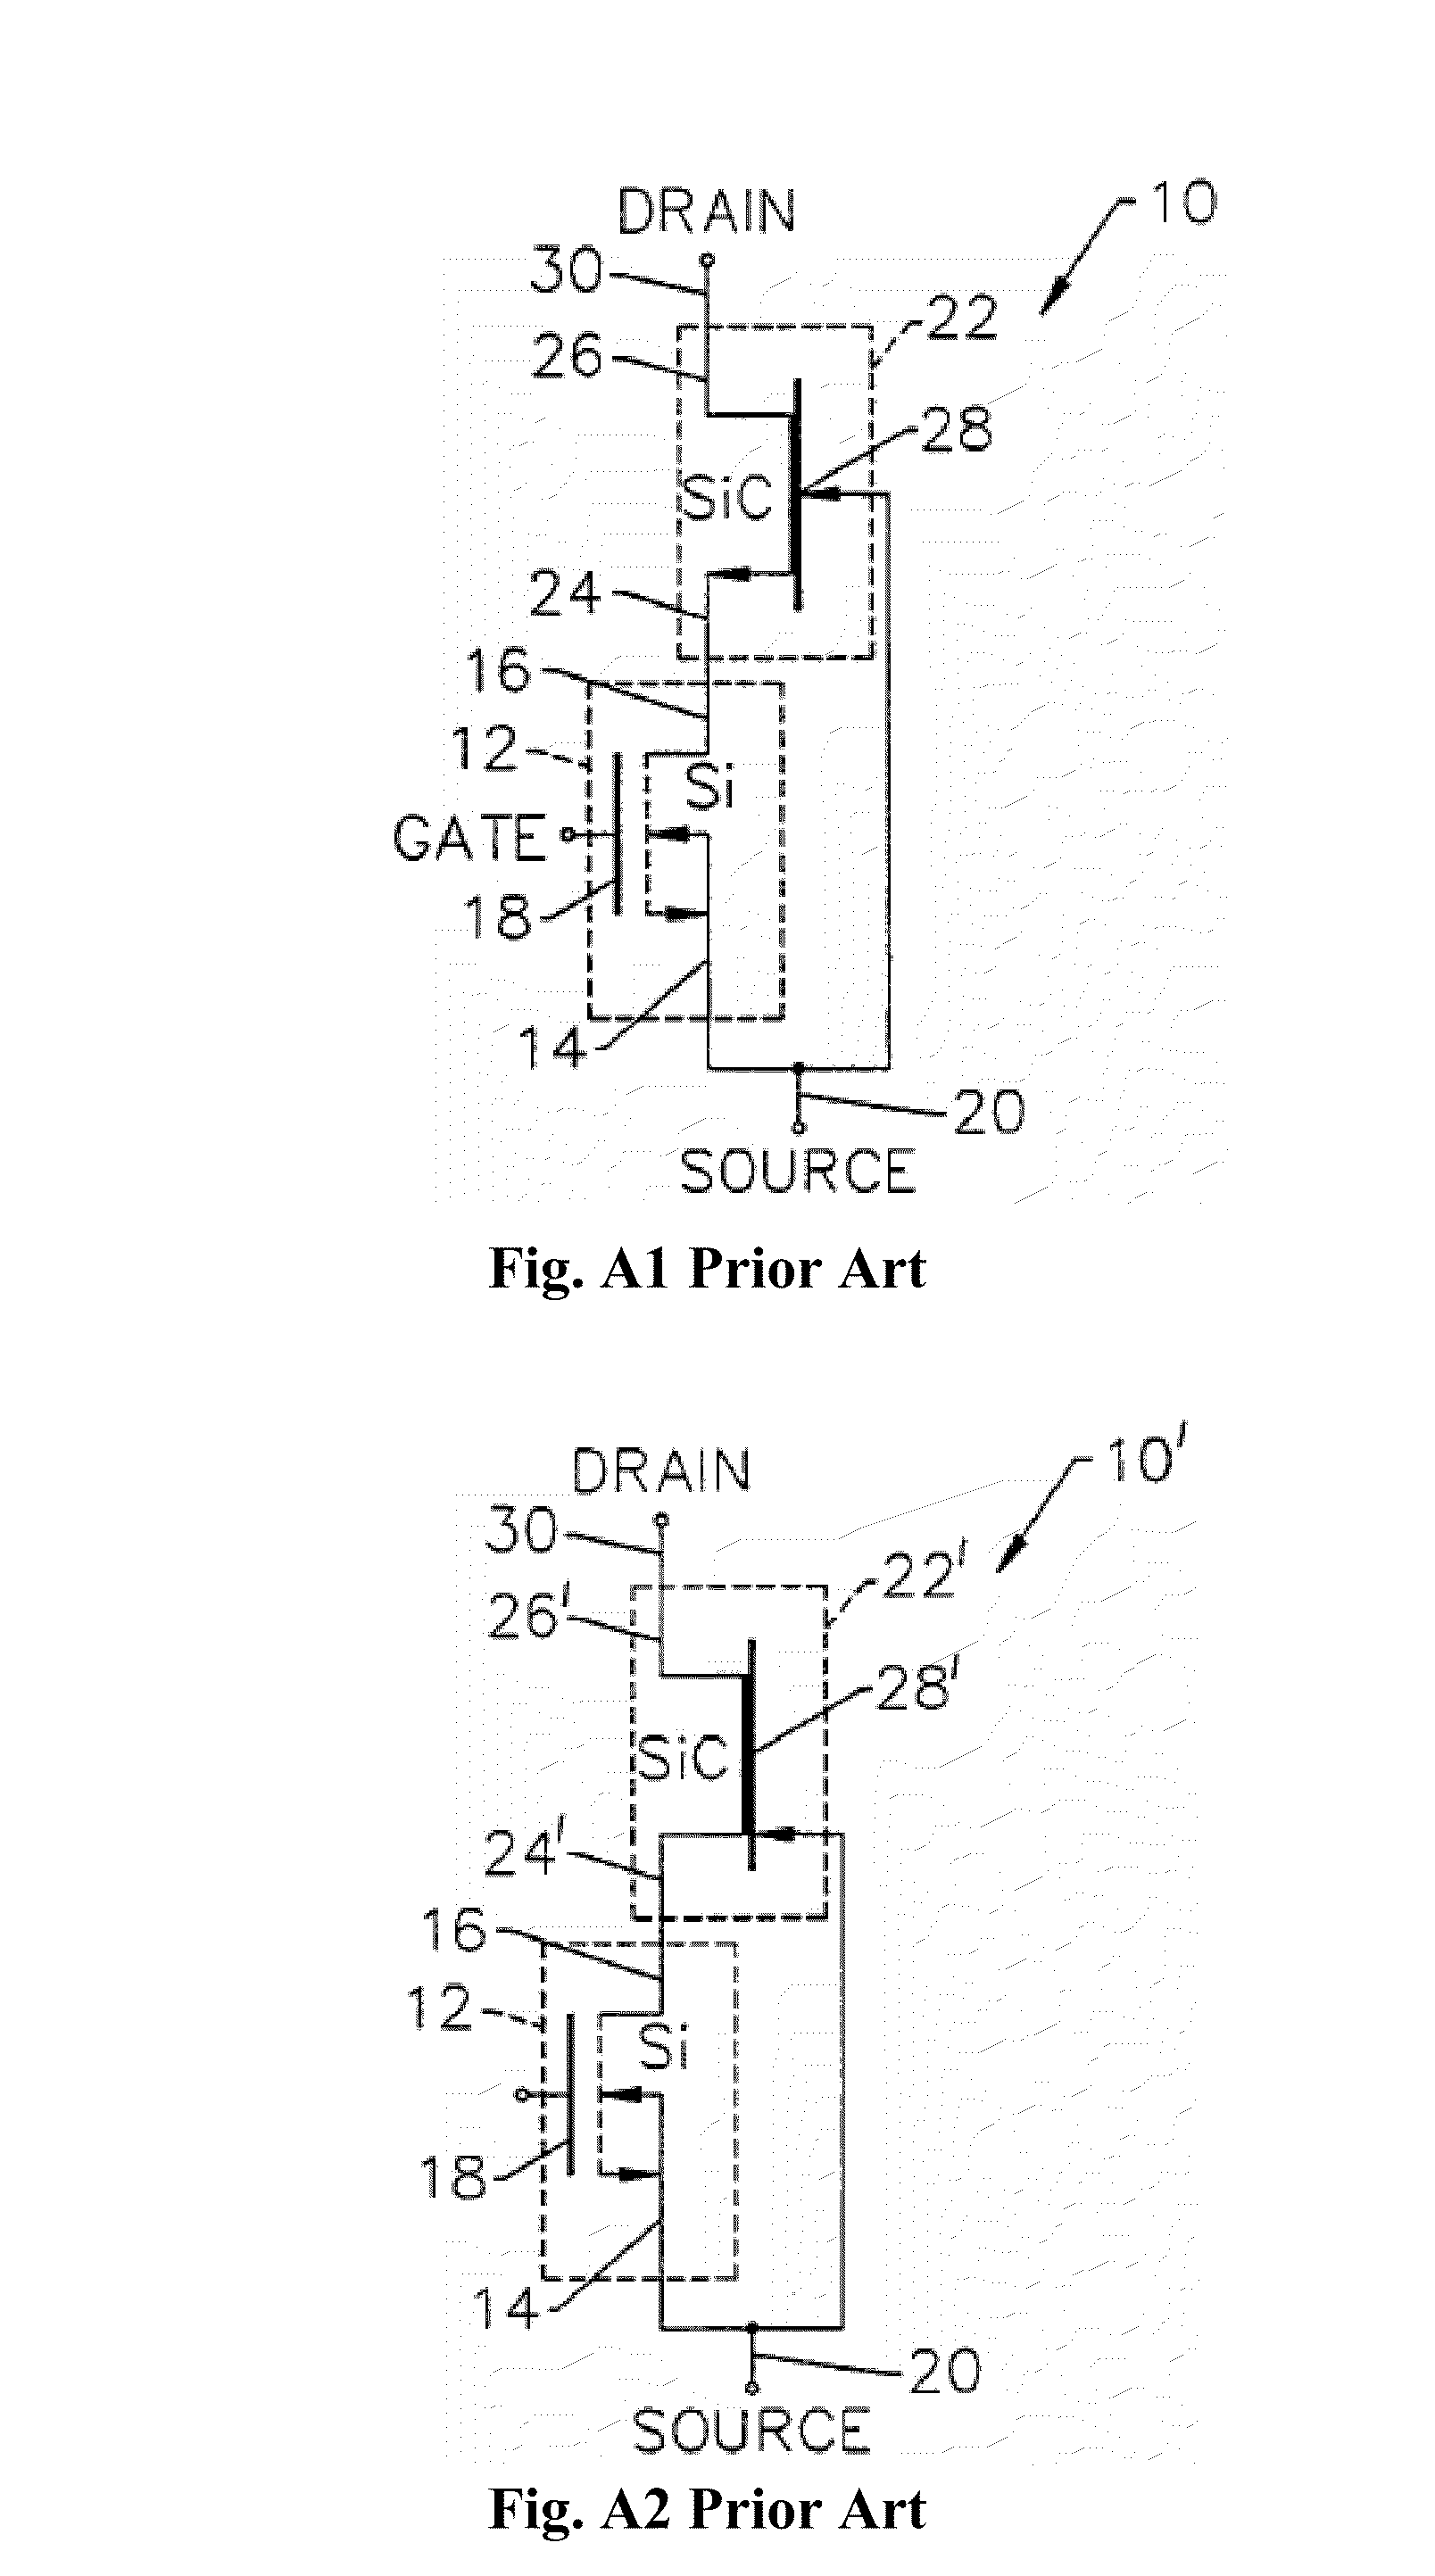 Hybrid Packaged Gate Controlled Semiconductor Switching Device Using GaN MESFET